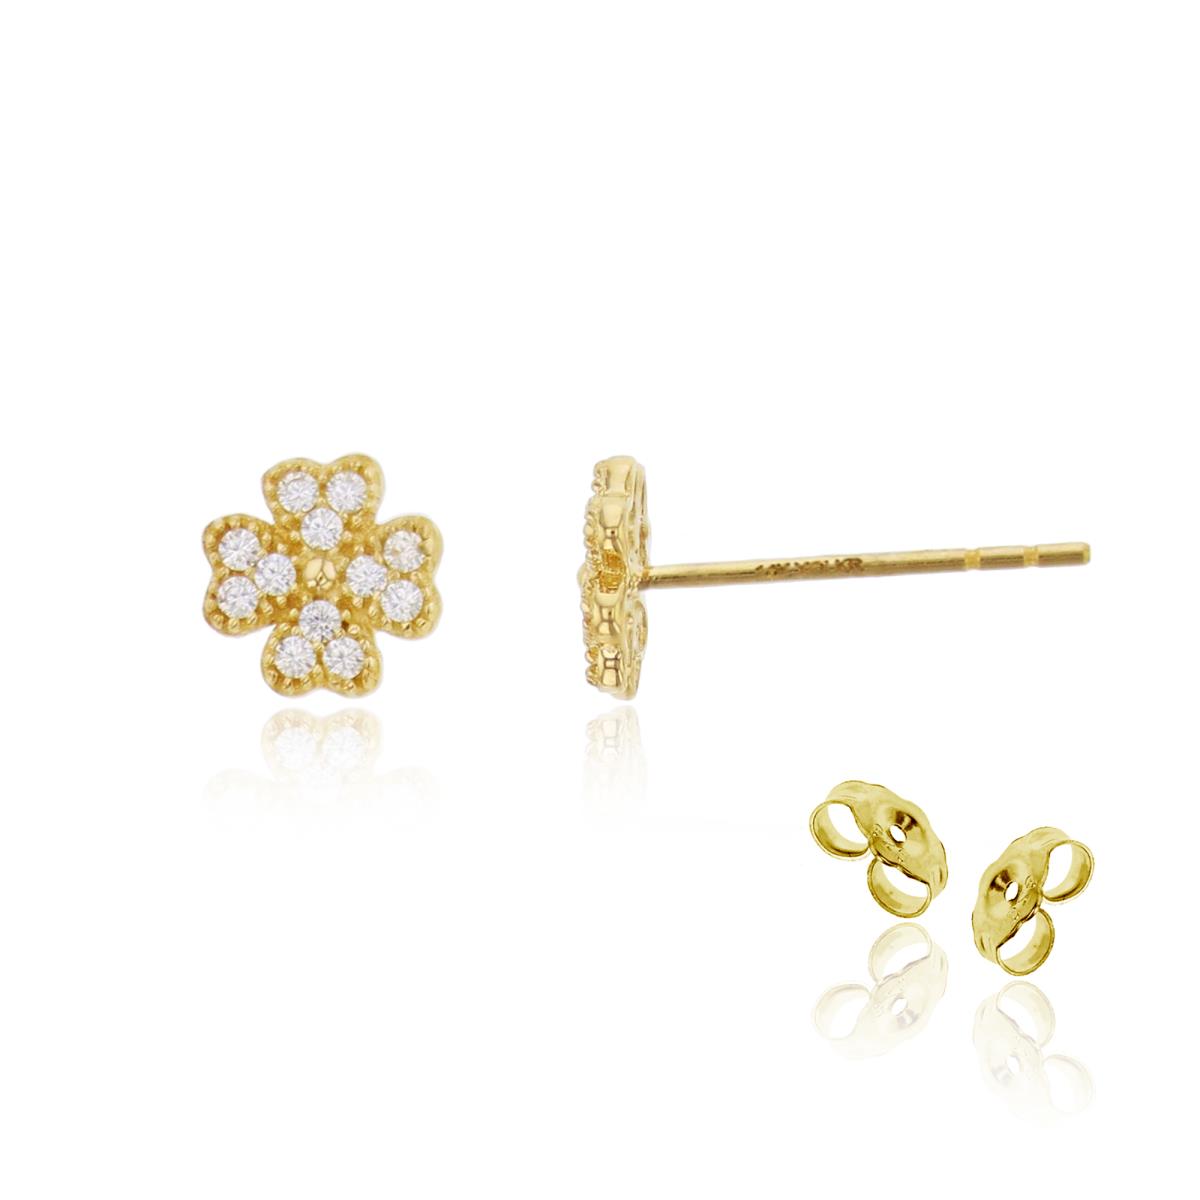 14K Yellow Gold 6mm Flower Stud Earring with 4.5mm Clutch